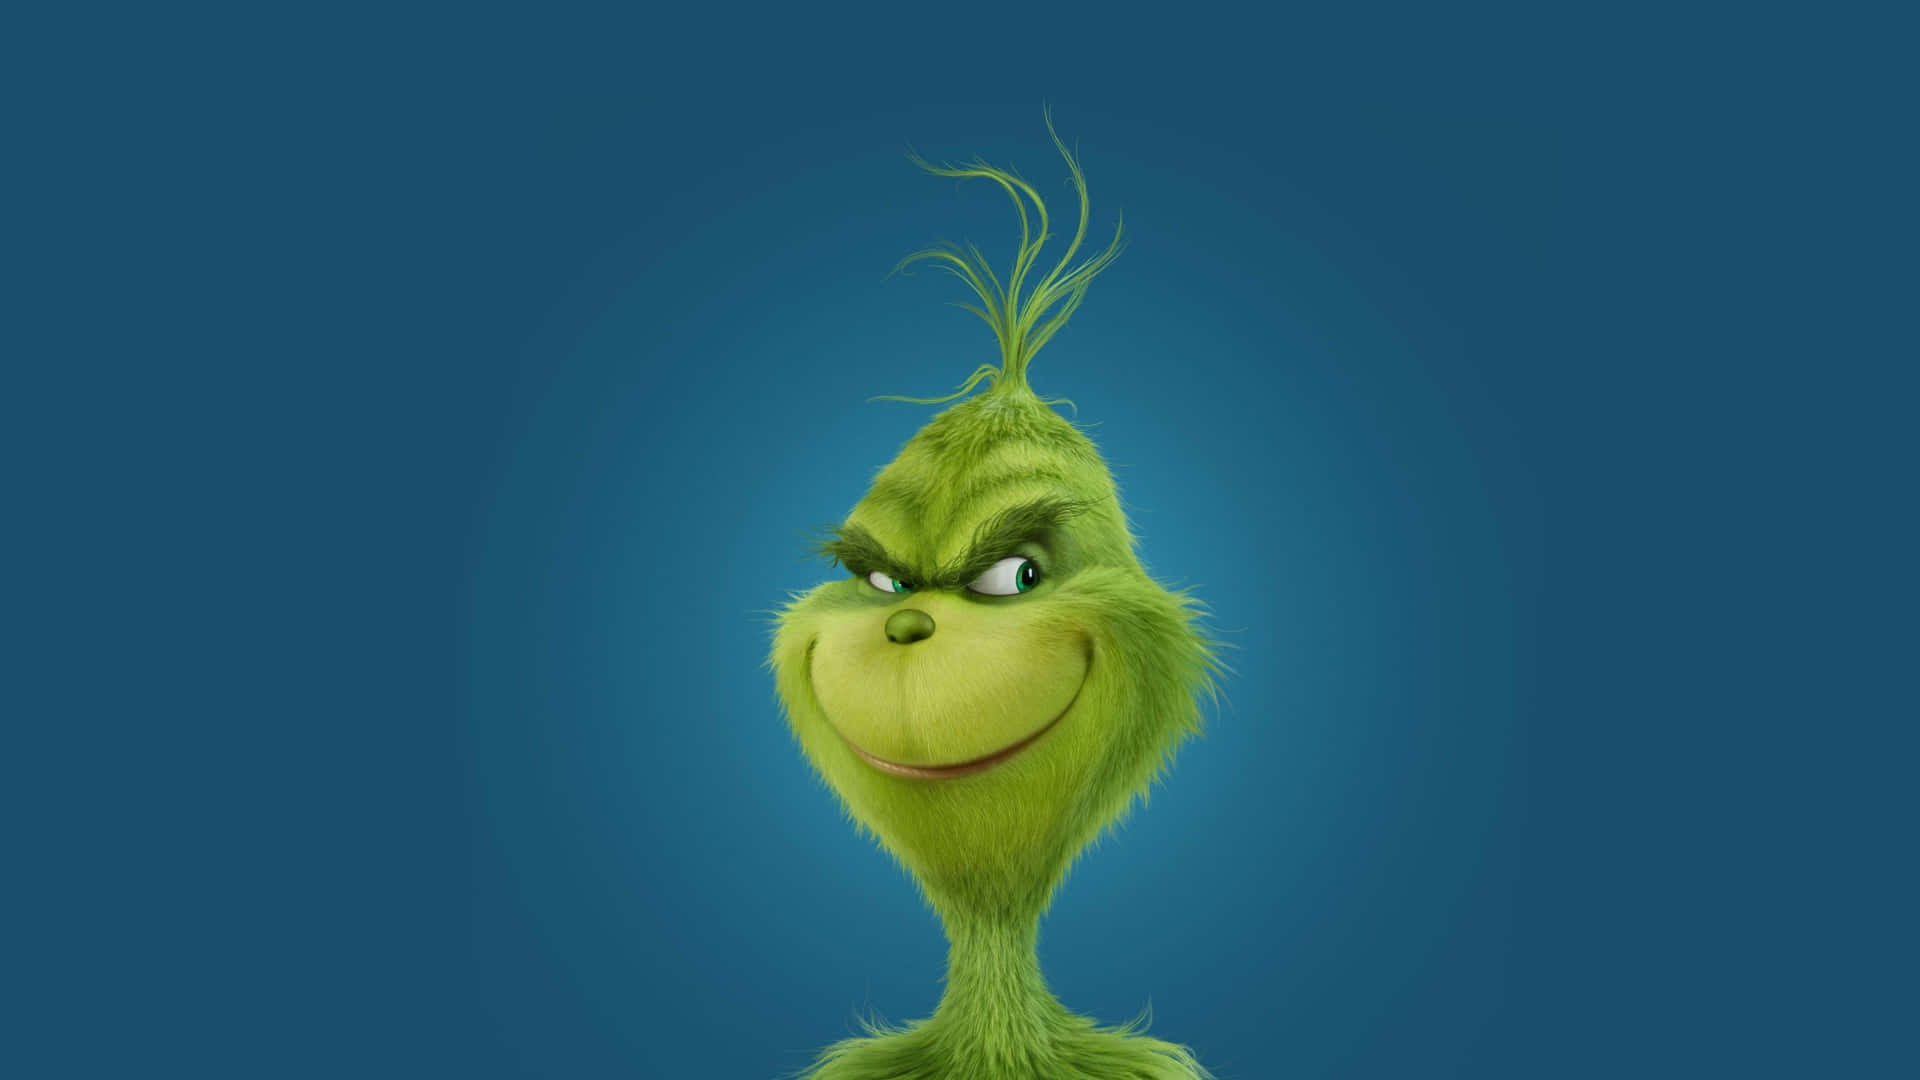 "The Christmas Grinch Has Arrived To Steal Your Joy". Wallpaper